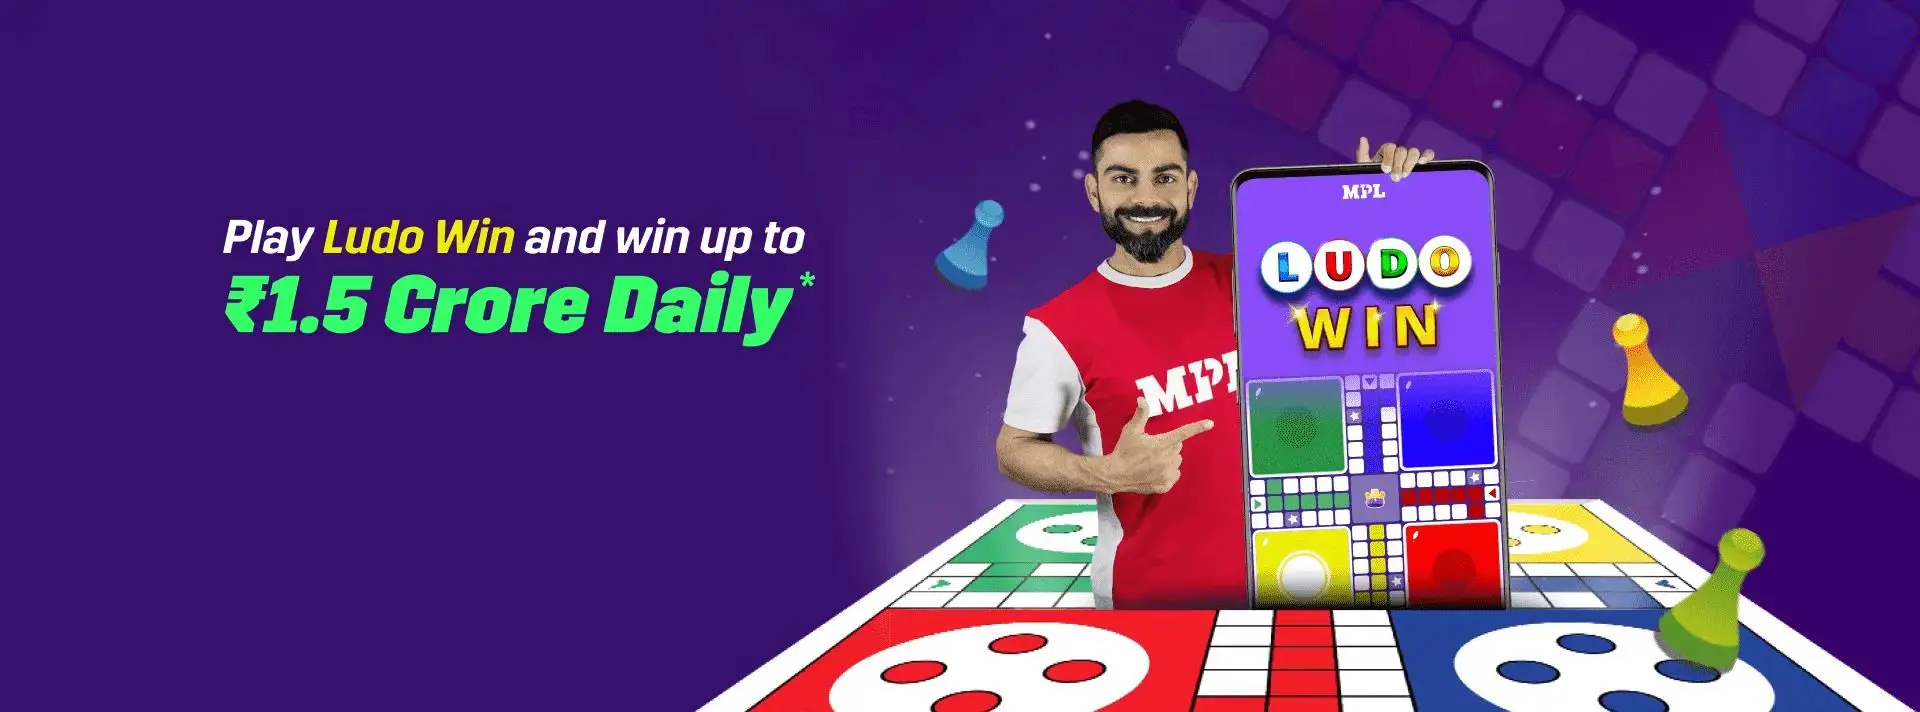 Play Ludo Dice on MPL & Win Cash Prizes